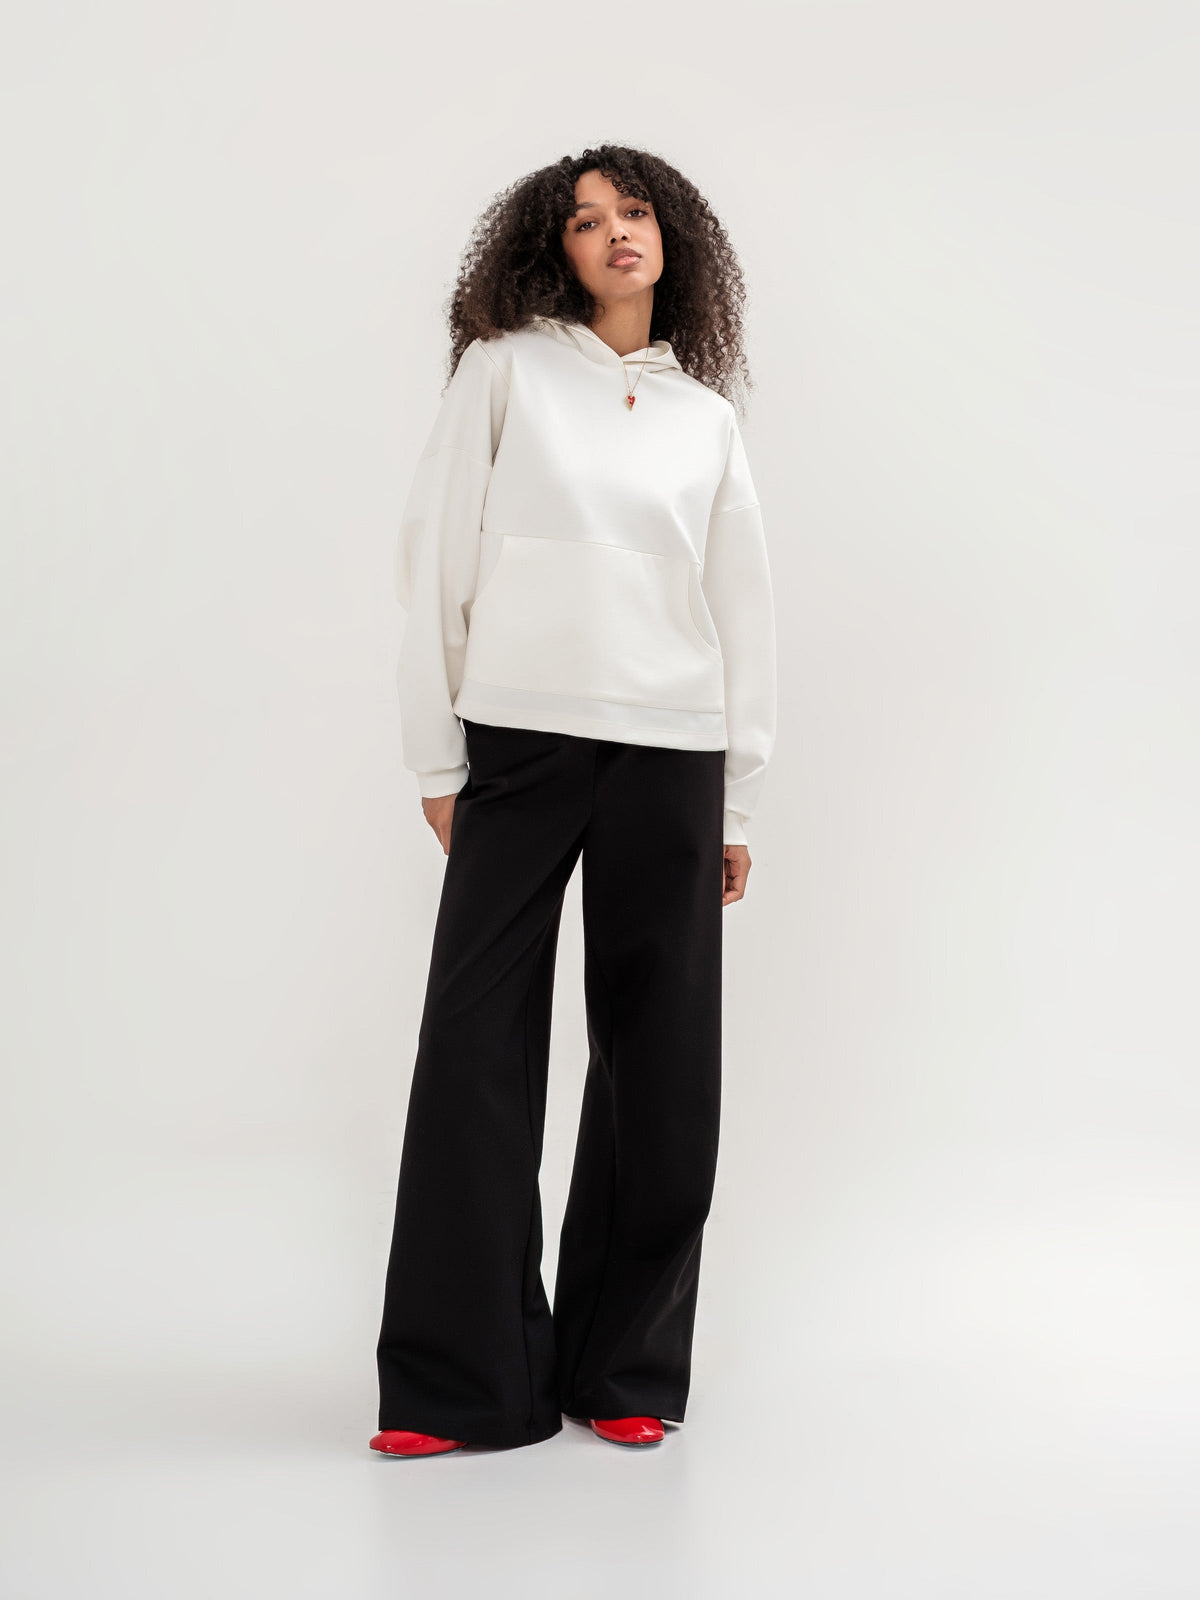 White hoodie with a zipper in the shoulder area on the back and  black wide leg trousers 